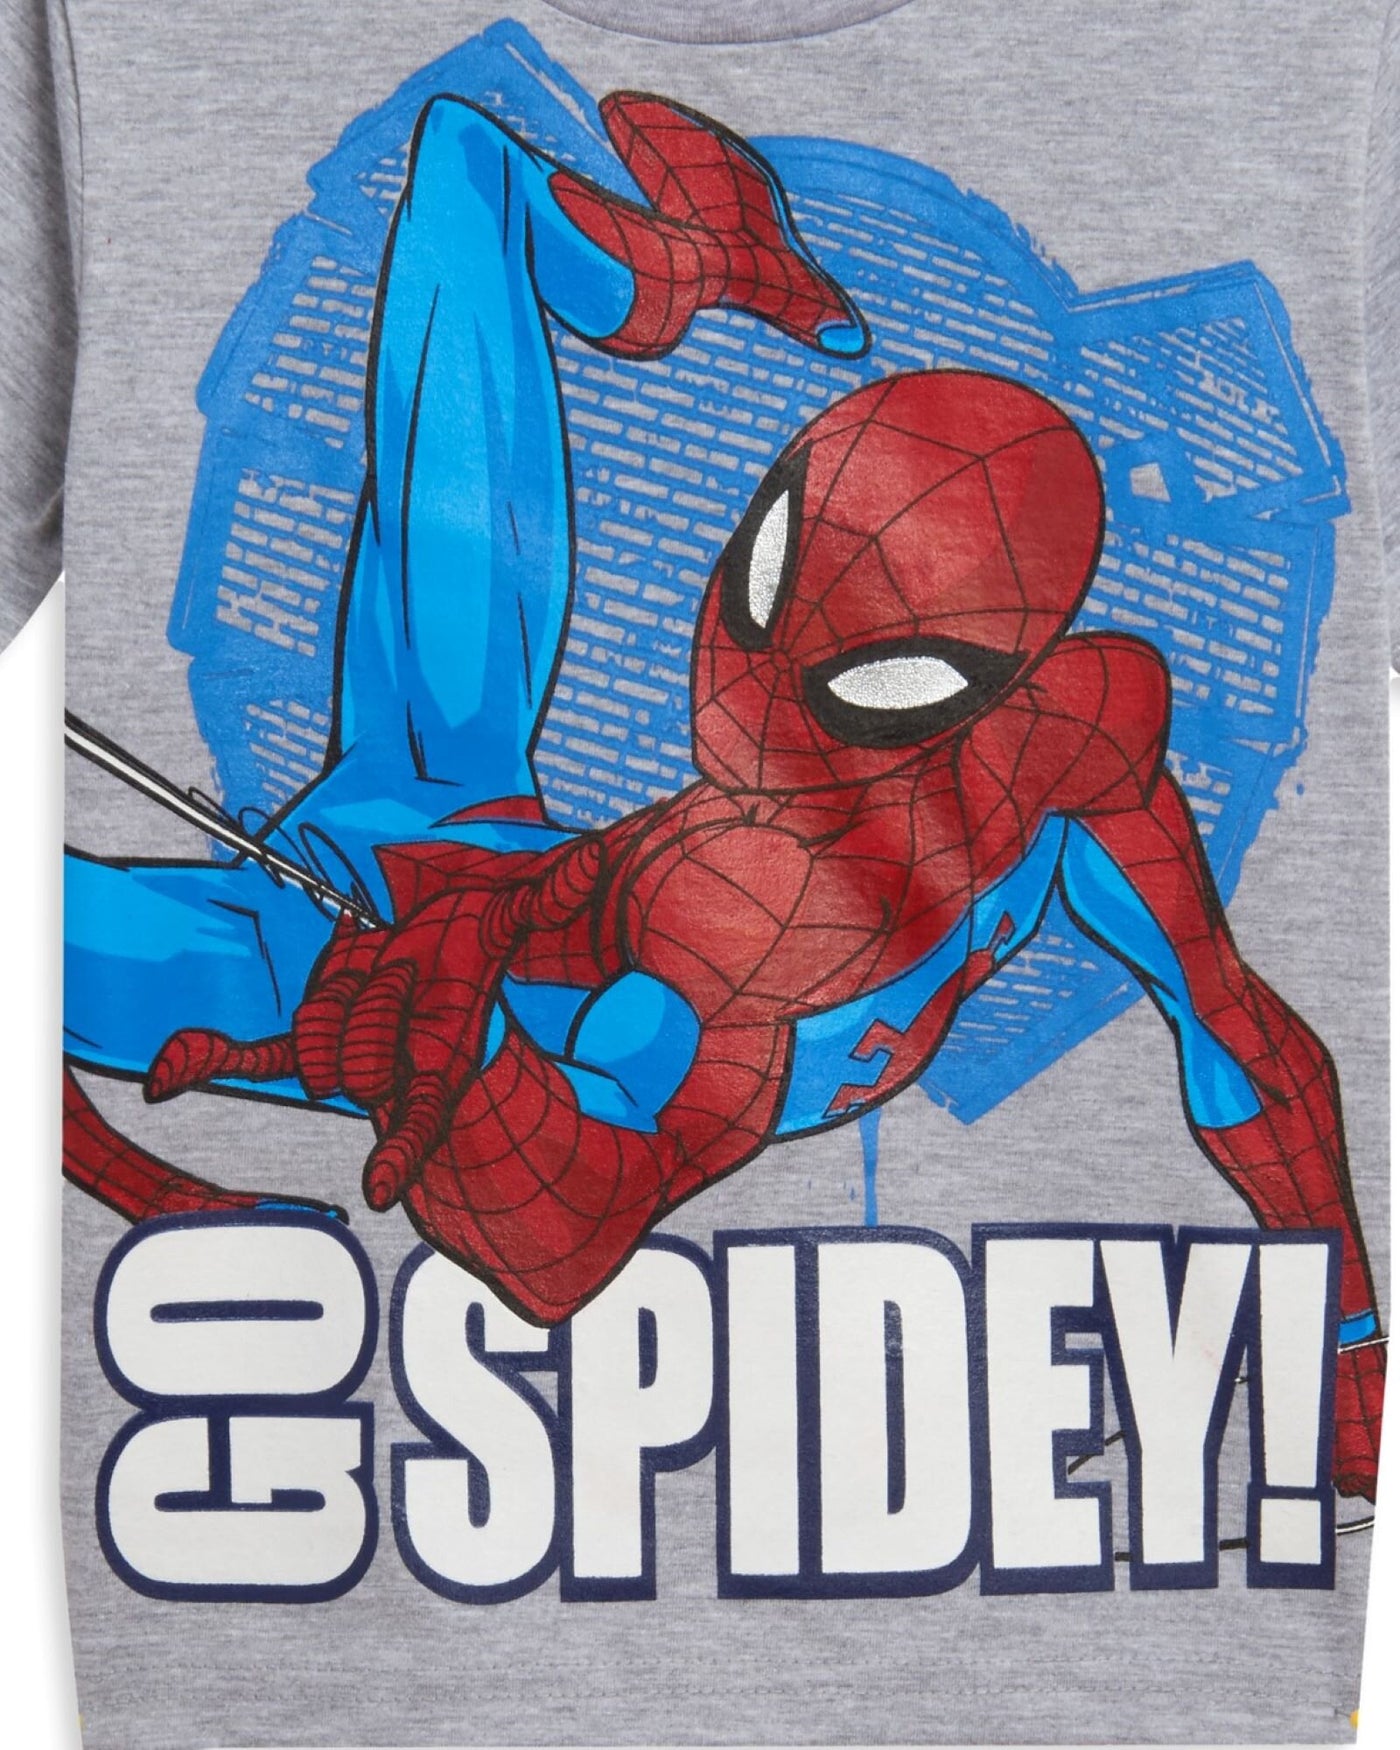 Marvel Spider-Man T-Shirt and Basketball Shorts Outfit Set